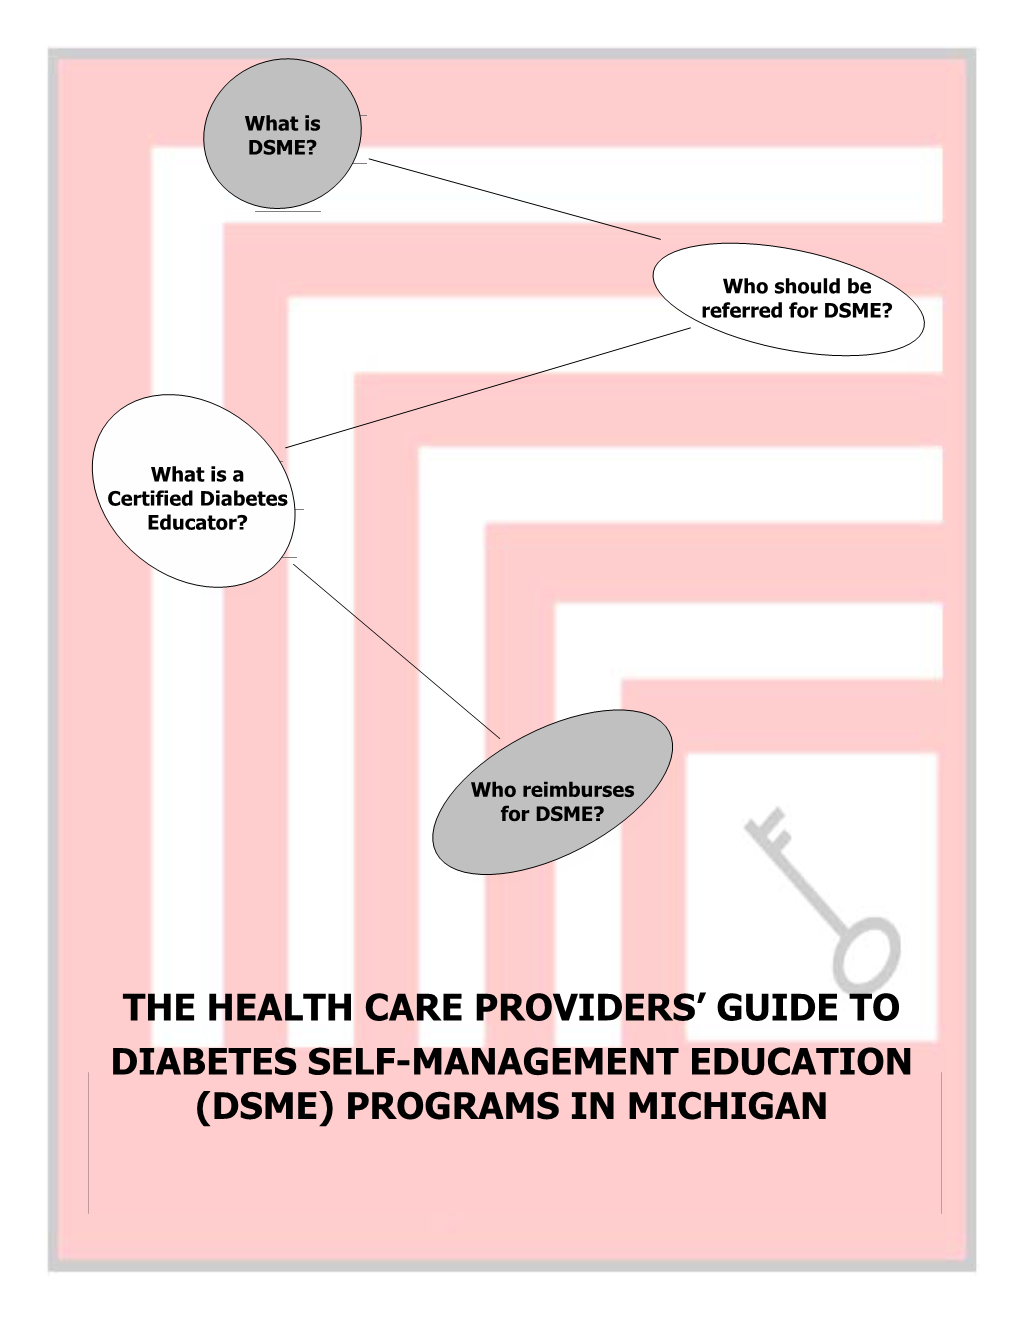 The Health Care Providers' Guide to Diabetes Self-Management